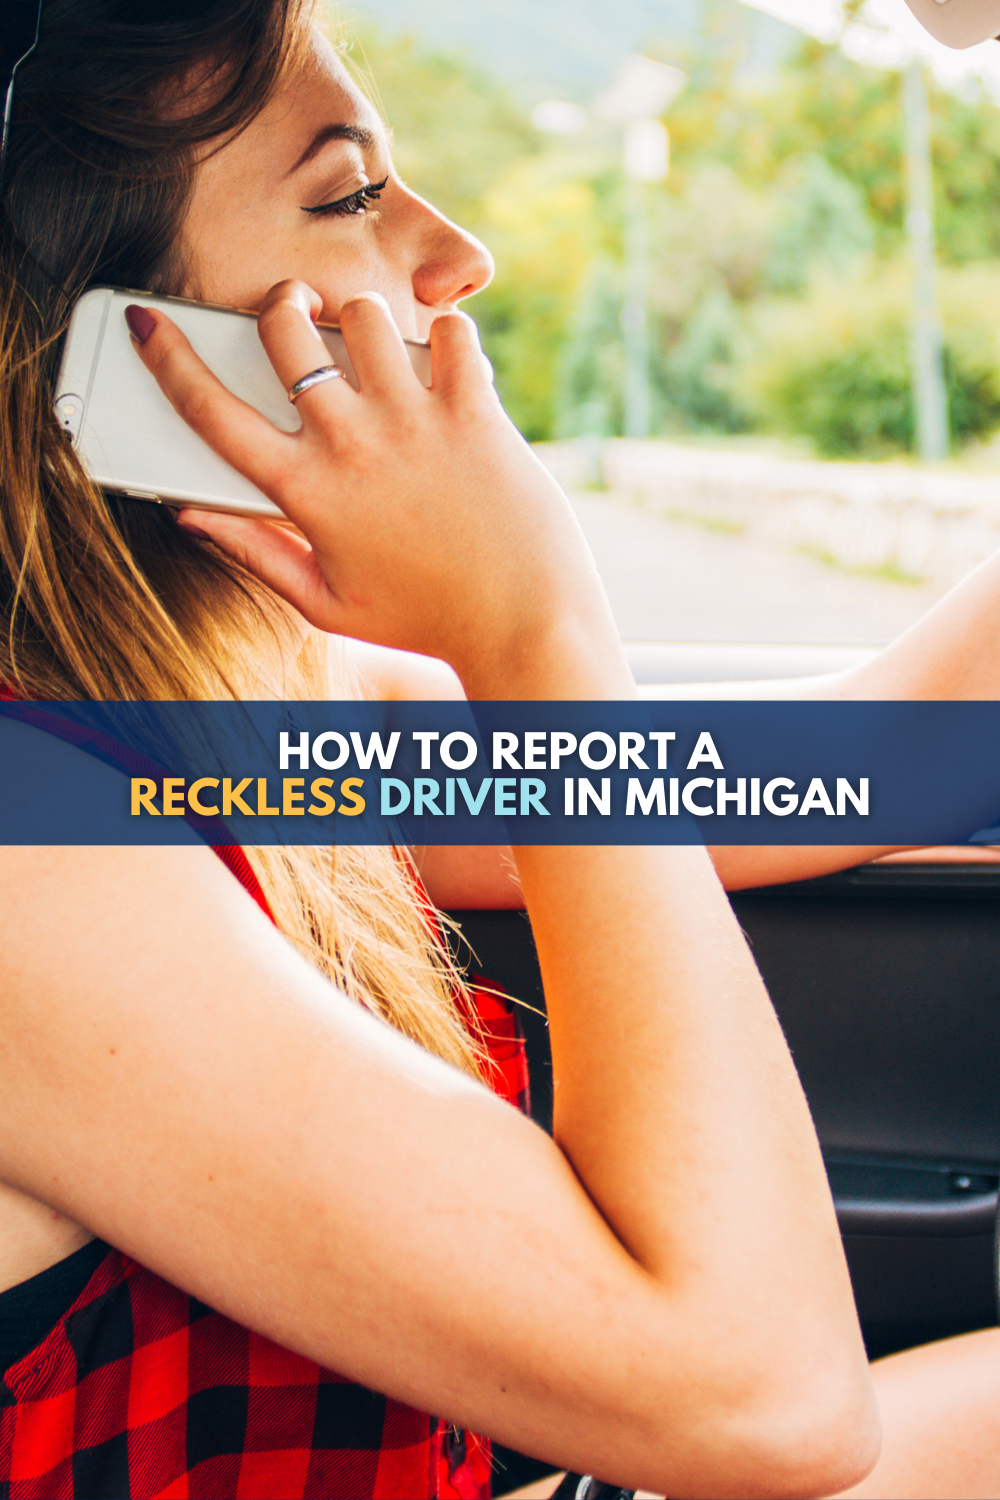 How To Report A Reckless Driver In Michigan